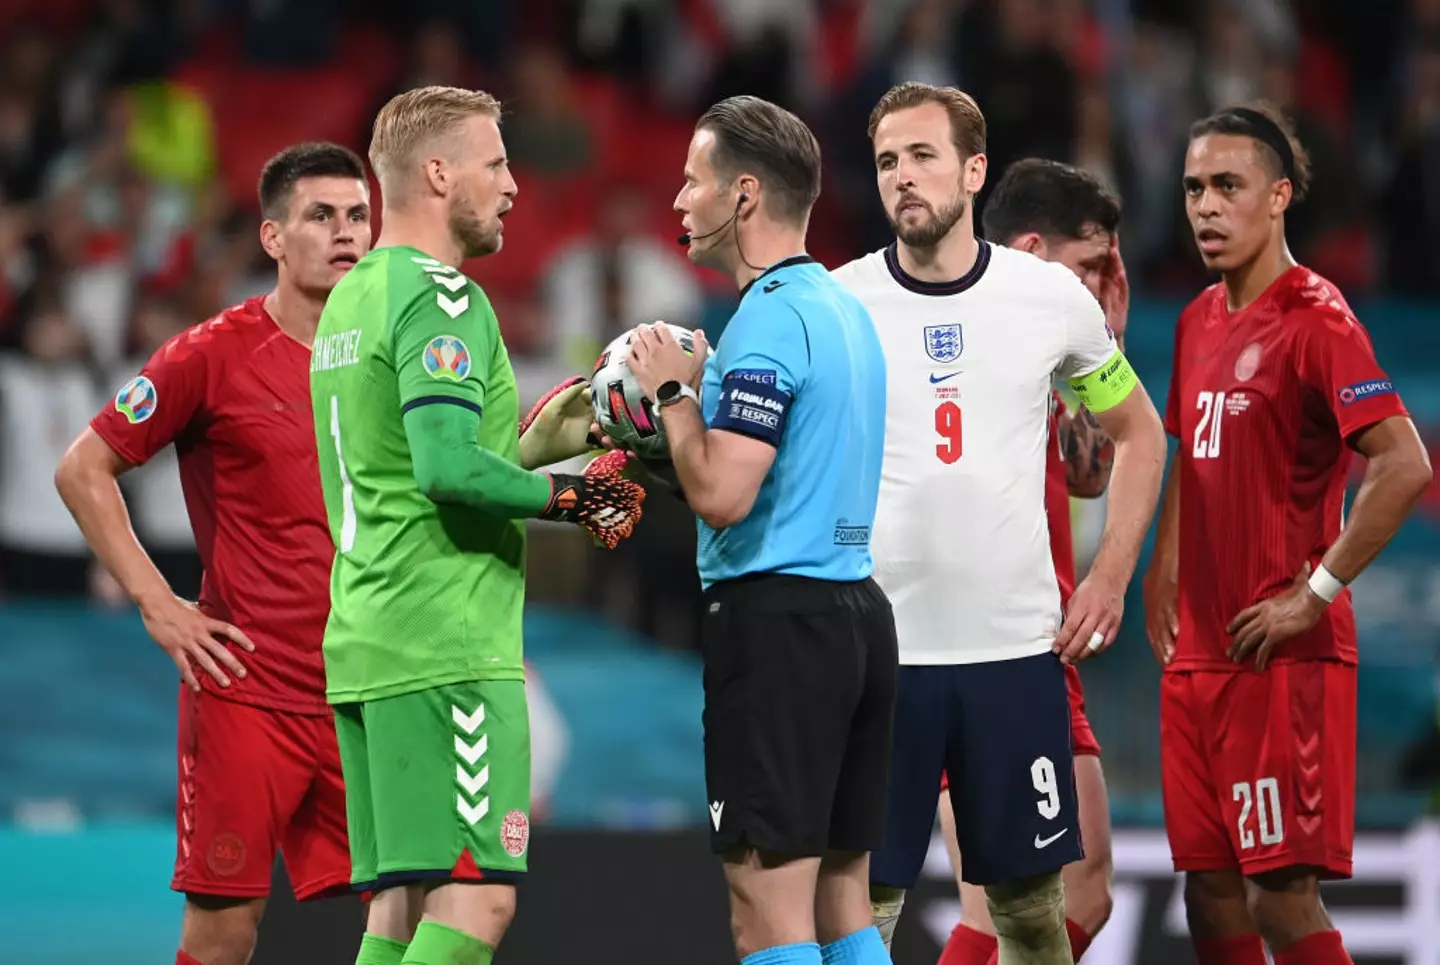 Things didn't go great last time England played against Denmark. (Andy Rain - Pool/Getty Images)